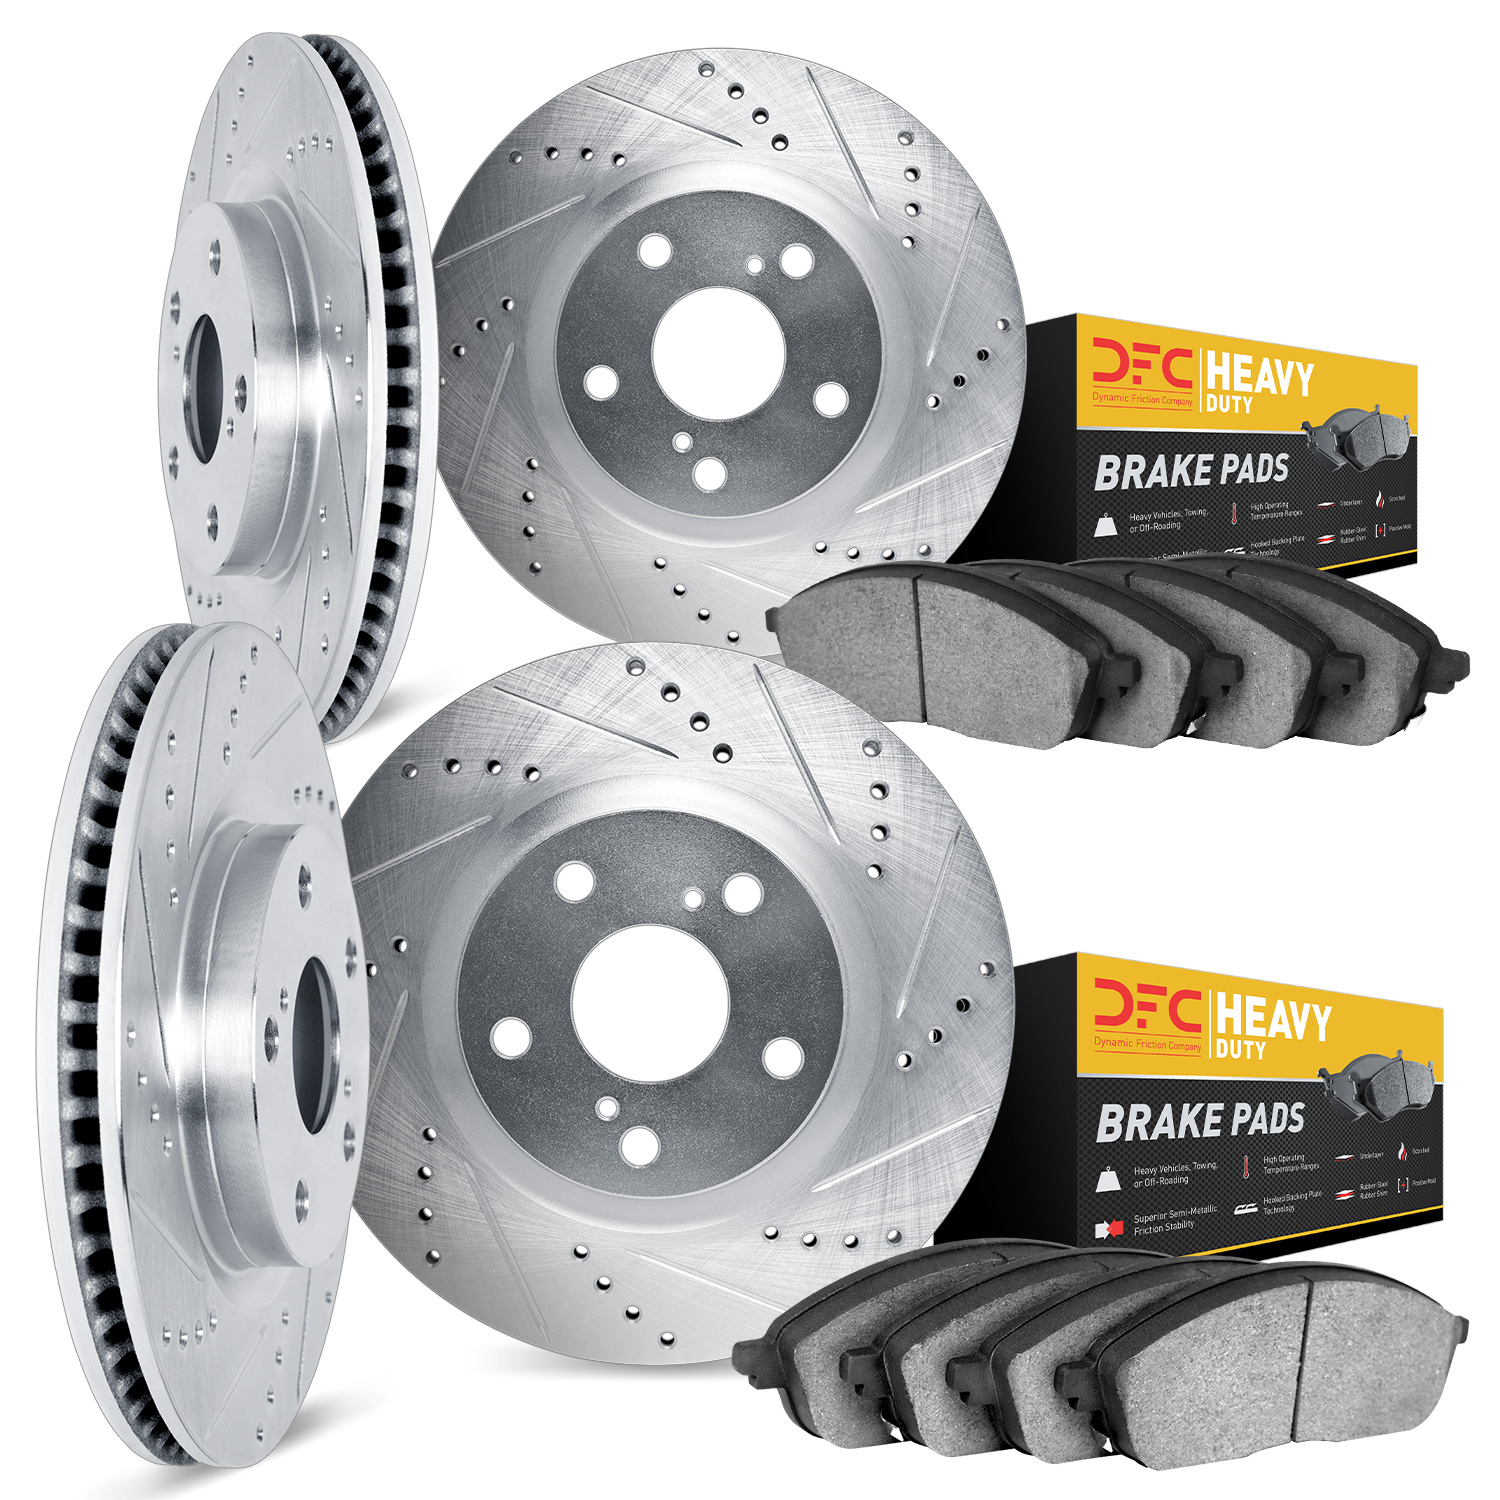 7204-76006 Drilled/Slotted Rotors w/Heavy-Duty Brake Pads Kit [Silver], Fits Select Lexus/Toyota/Scion, Position: Front and Rear